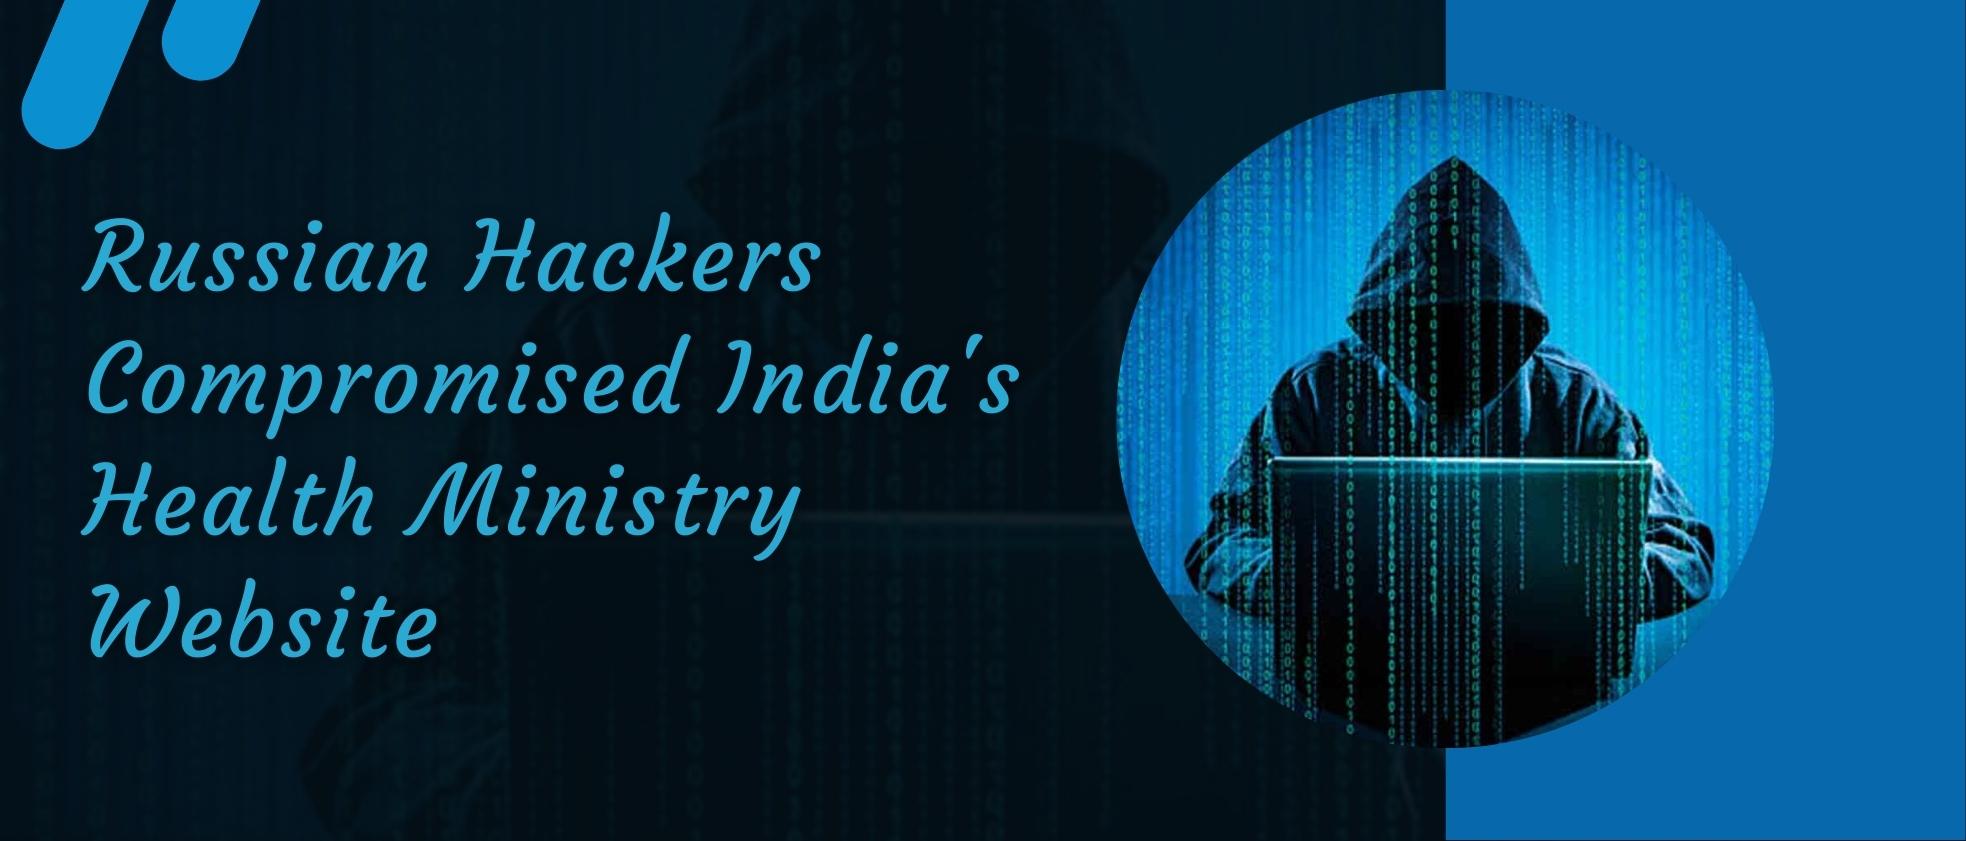 Russian Hackers Compromised India's Health Ministry Website